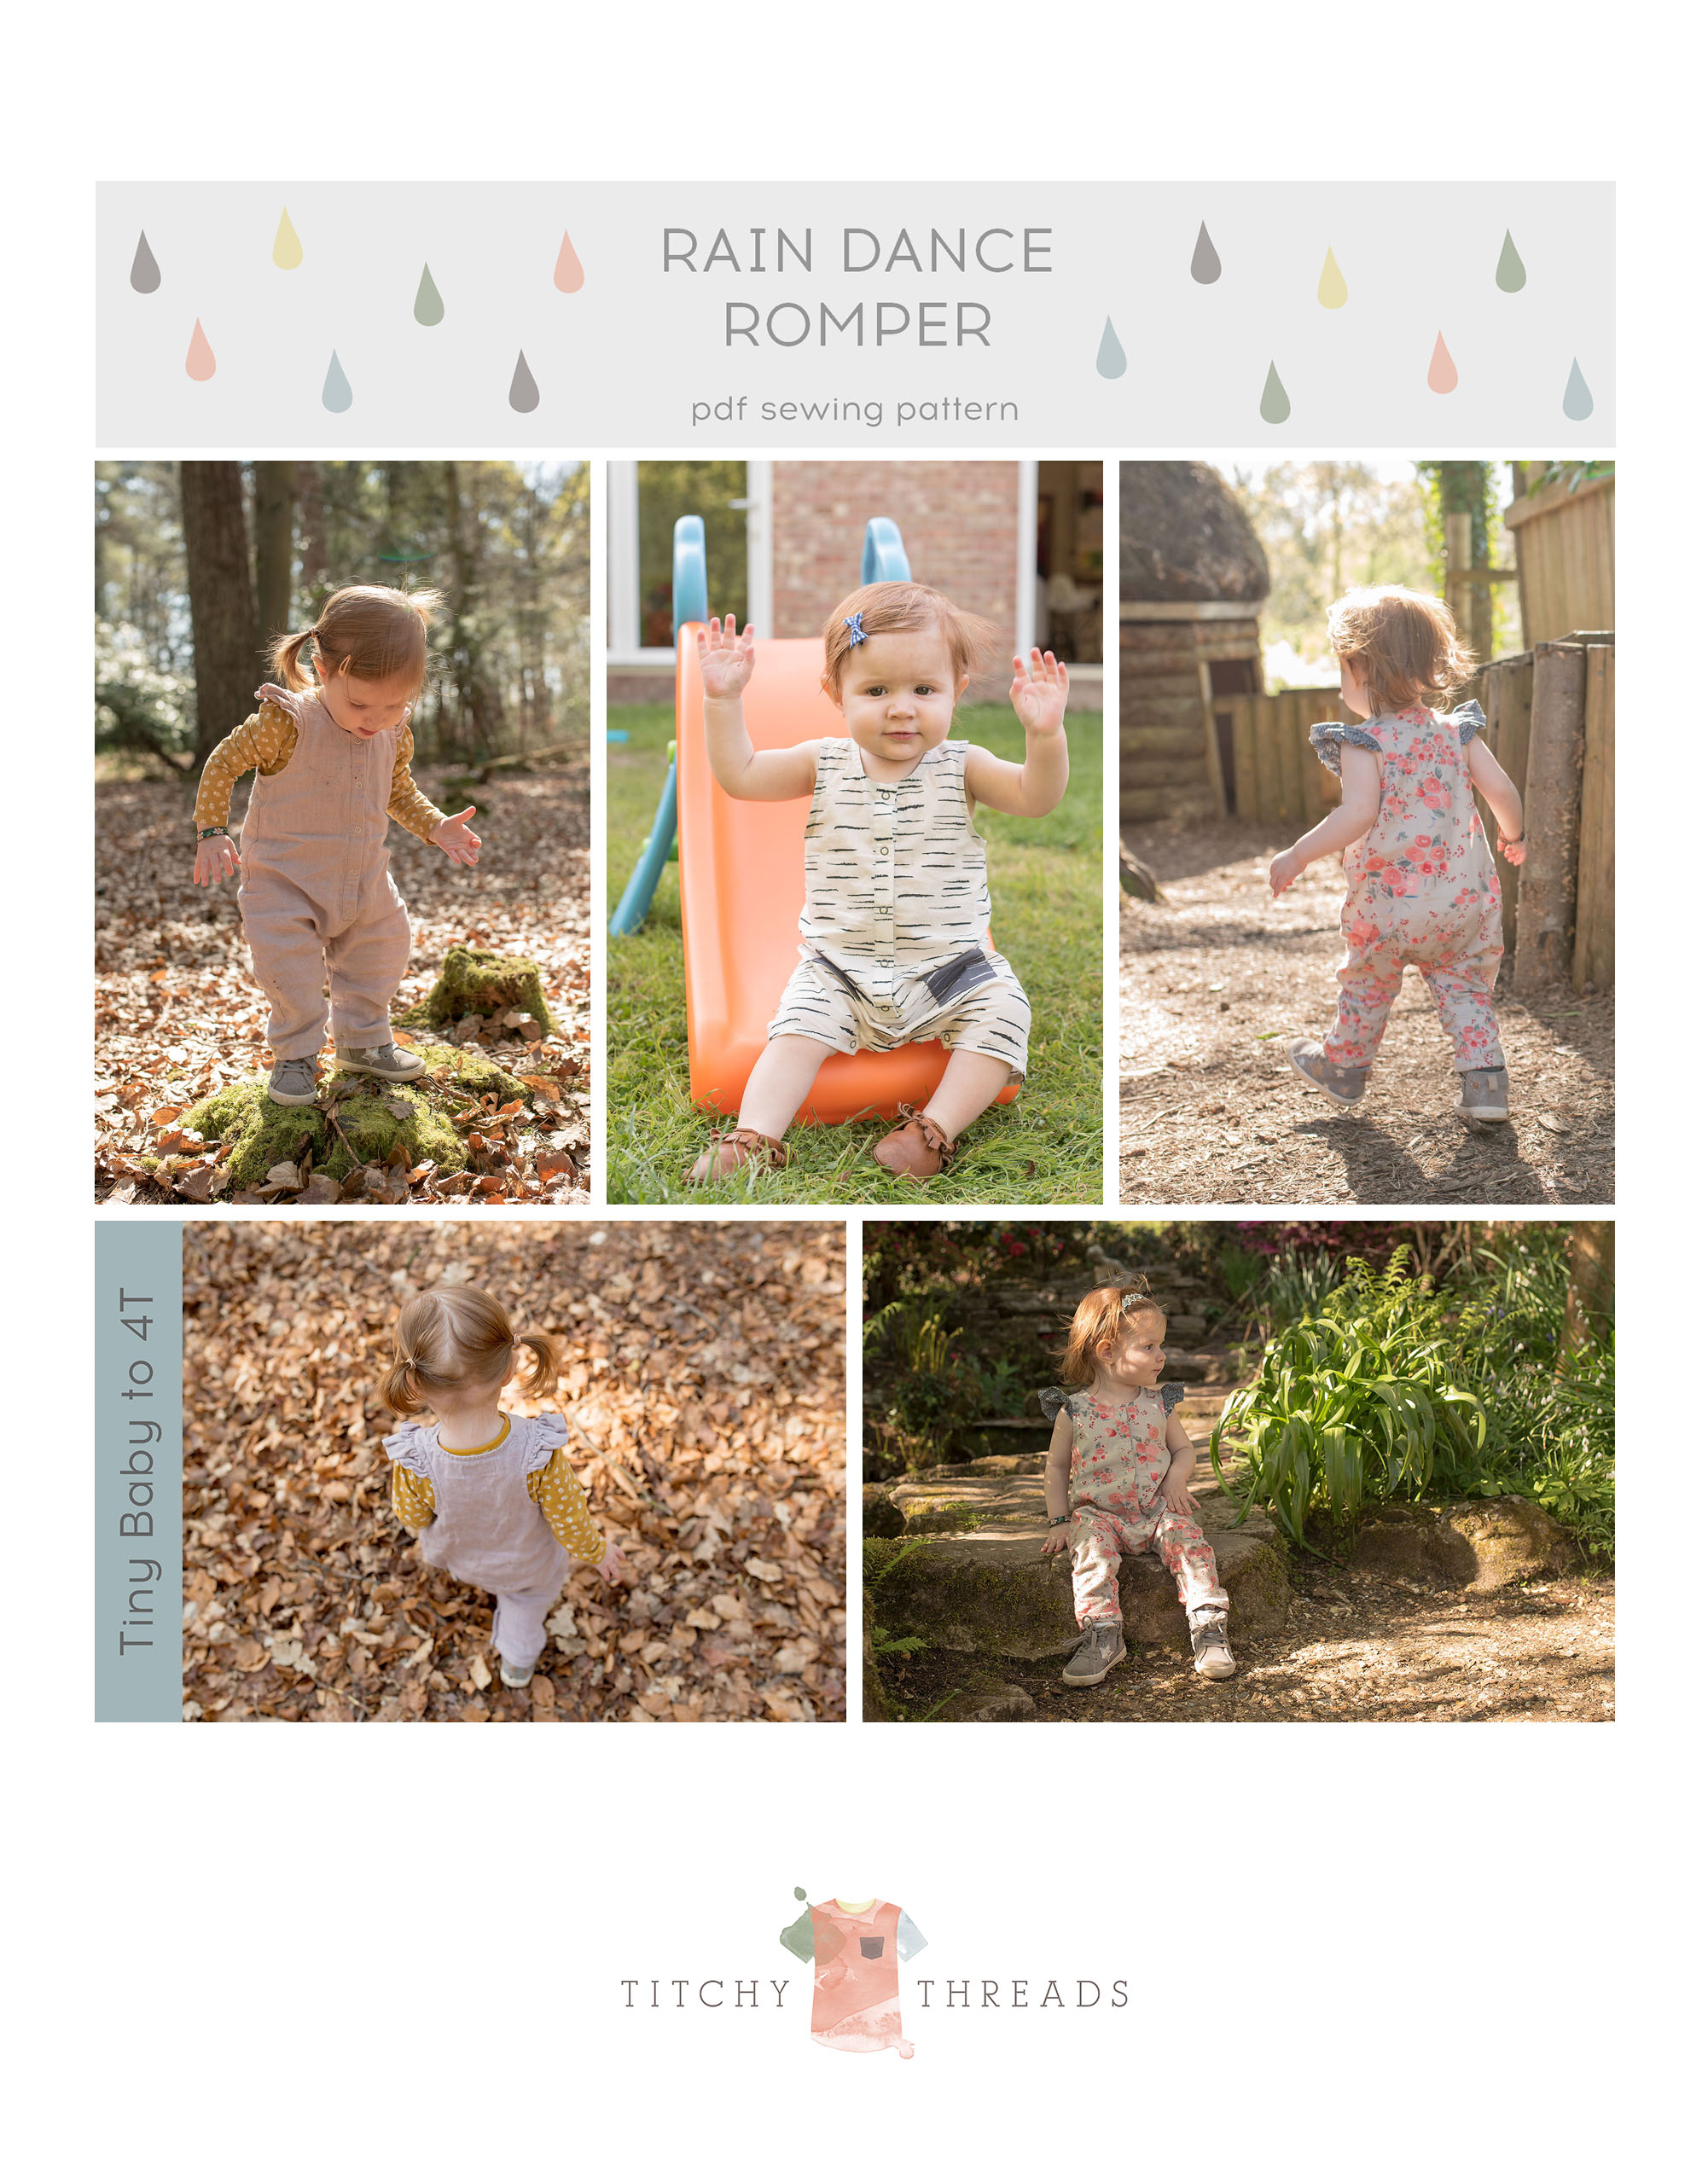 The Rain Dance Romper is a sweet sleeveless romper for boys or girls, for ages Tiny Baby to 4T. Perfect for any season - bare those baby arms and legs in summer, or layer over a long sleeved tee in winter.